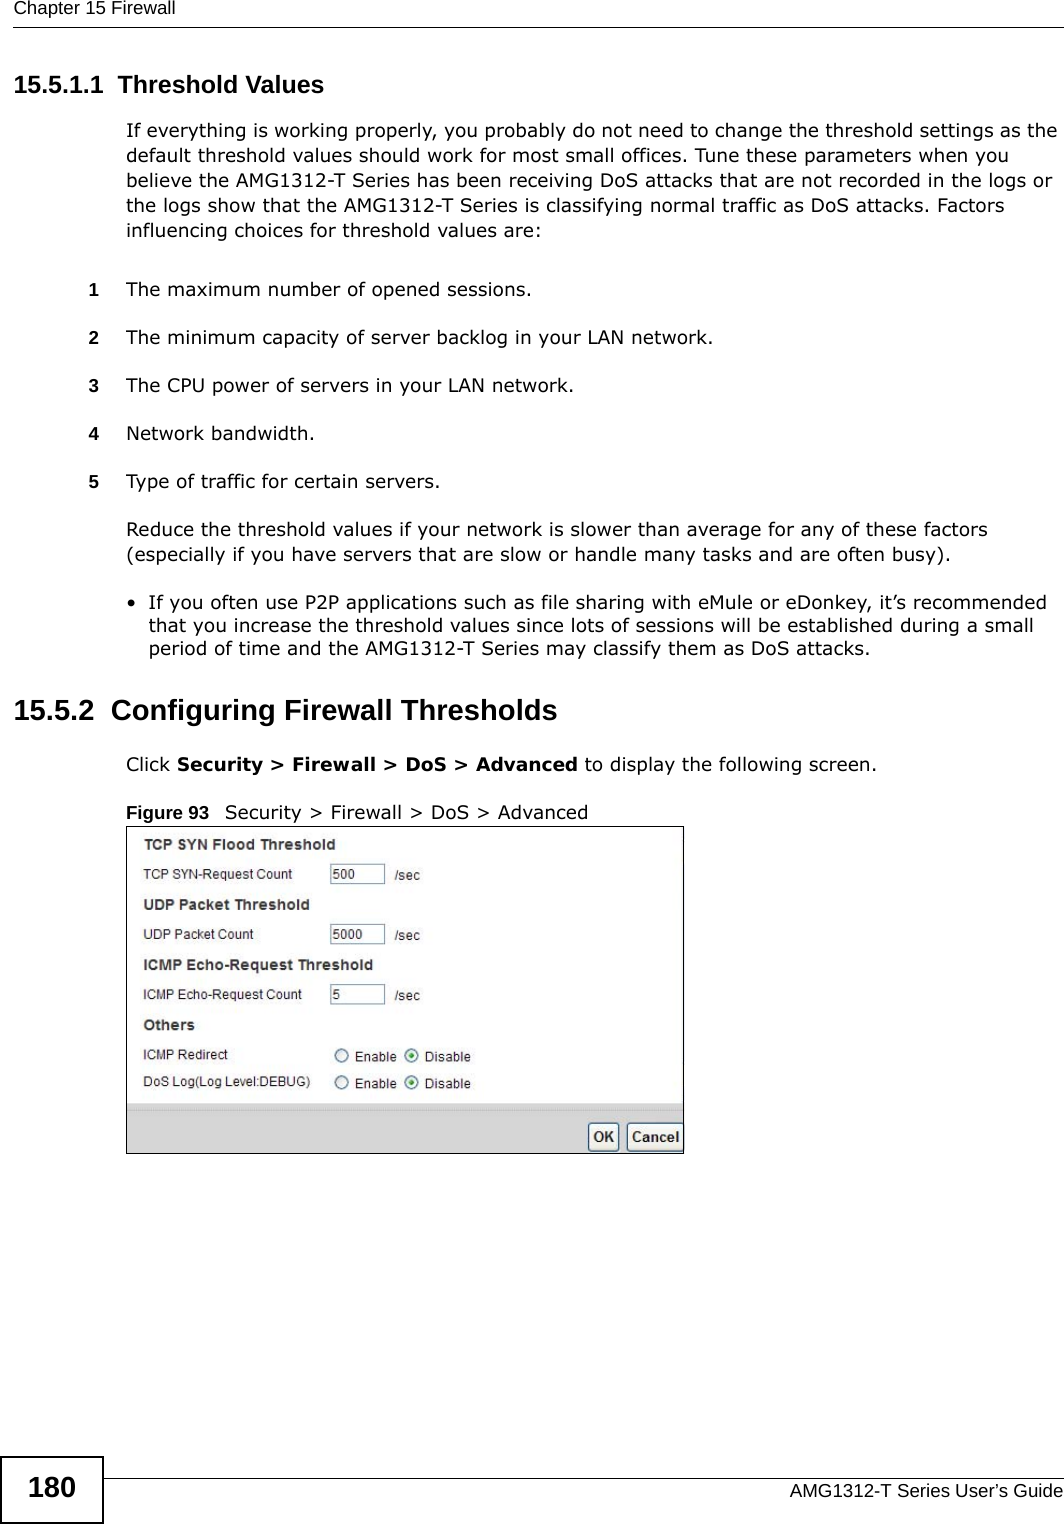 Chapter 15 FirewallAMG1312-T Series User’s Guide18015.5.1.1  Threshold ValuesIf everything is working properly, you probably do not need to change the threshold settings as the default threshold values should work for most small offices. Tune these parameters when you believe the AMG1312-T Series has been receiving DoS attacks that are not recorded in the logs or the logs show that the AMG1312-T Series is classifying normal traffic as DoS attacks. Factors influencing choices for threshold values are:1The maximum number of opened sessions.2The minimum capacity of server backlog in your LAN network.3The CPU power of servers in your LAN network.4Network bandwidth. 5Type of traffic for certain servers.Reduce the threshold values if your network is slower than average for any of these factors (especially if you have servers that are slow or handle many tasks and are often busy). • If you often use P2P applications such as file sharing with eMule or eDonkey, it’s recommended that you increase the threshold values since lots of sessions will be established during a small period of time and the AMG1312-T Series may classify them as DoS attacks. 15.5.2  Configuring Firewall ThresholdsClick Security &gt; Firewall &gt; DoS &gt; Advanced to display the following screen.Figure 93   Security &gt; Firewall &gt; DoS &gt; Advanced 